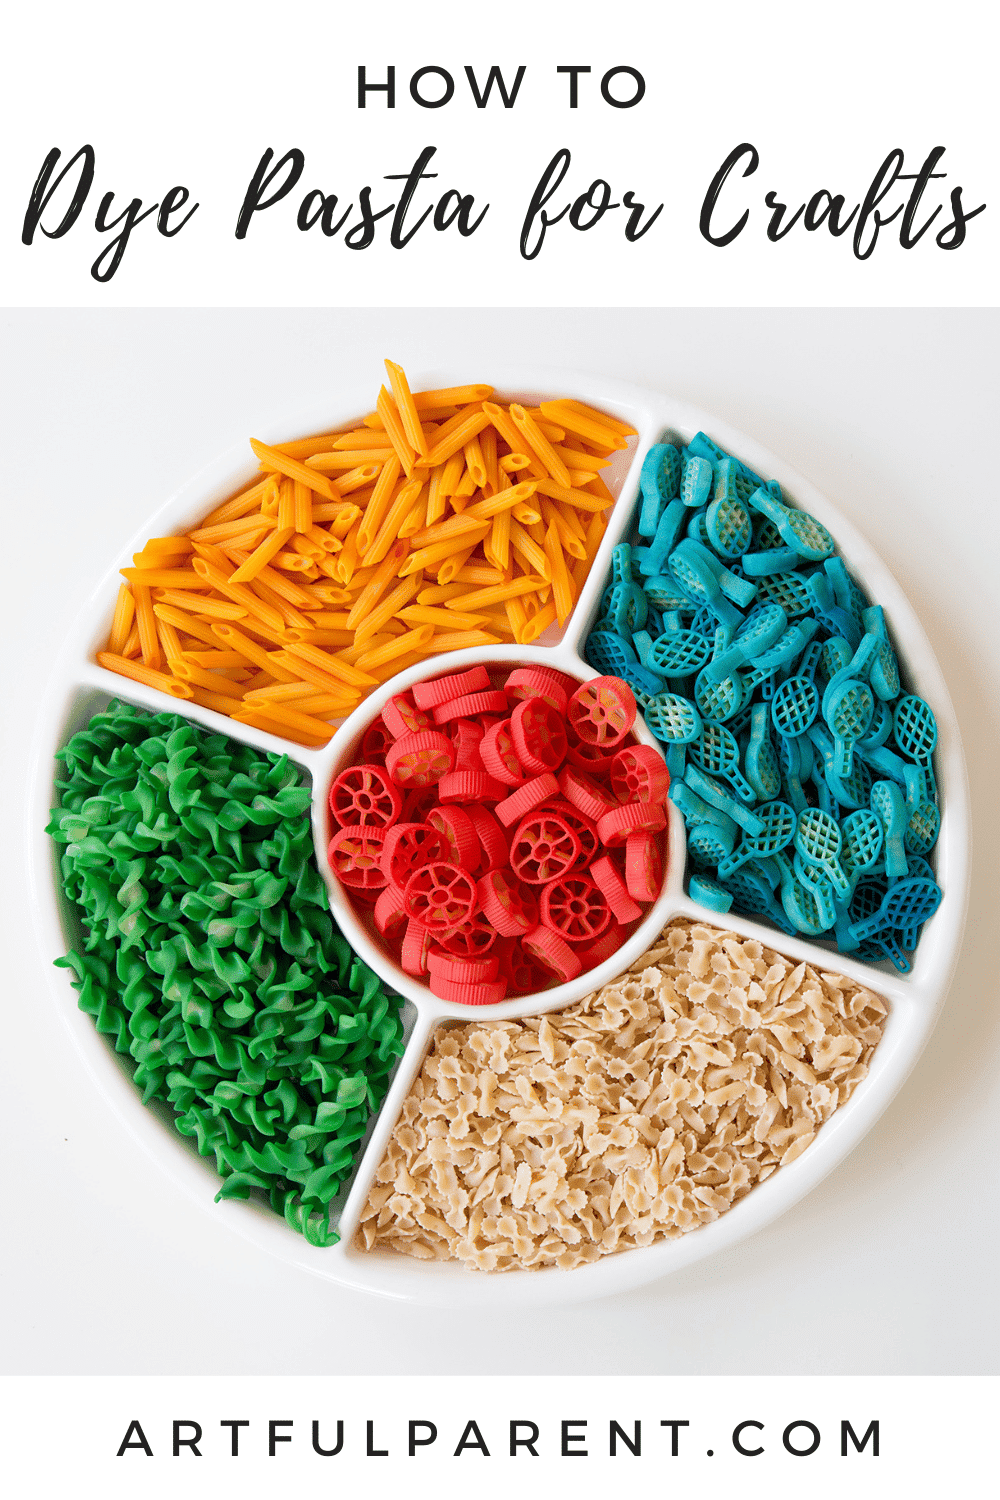 How to Dye Pasta for Crafts